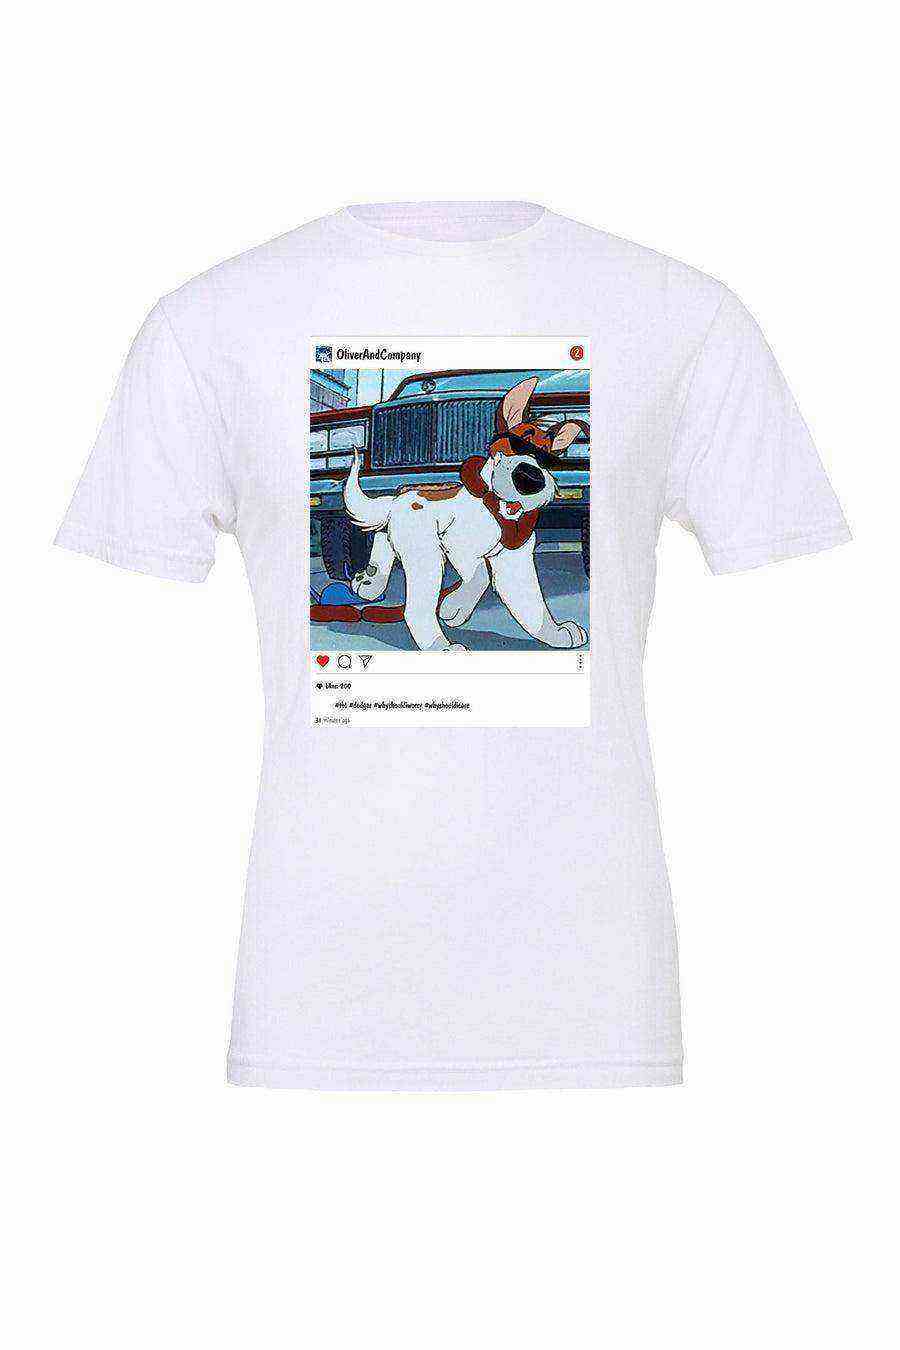 Womens | Insta Throw Back Shirt | Oliver And Company - Dylan's Tees